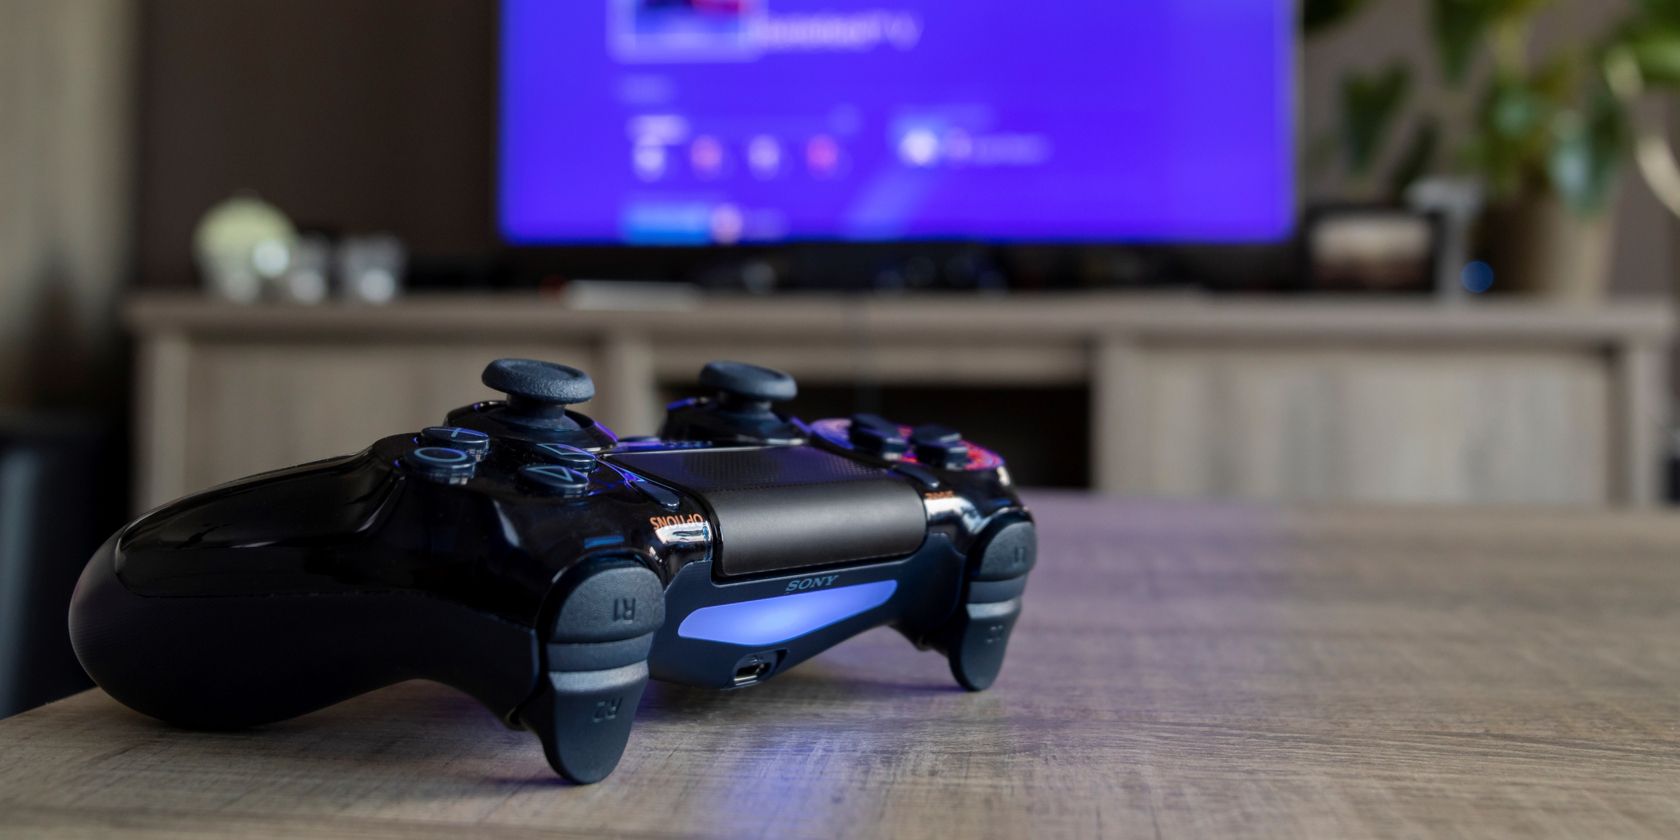 Connect a different device, such as a smartphone, to the PS4 controller's USB port.
If the other device charges successfully, the issue may be with the controller itself.